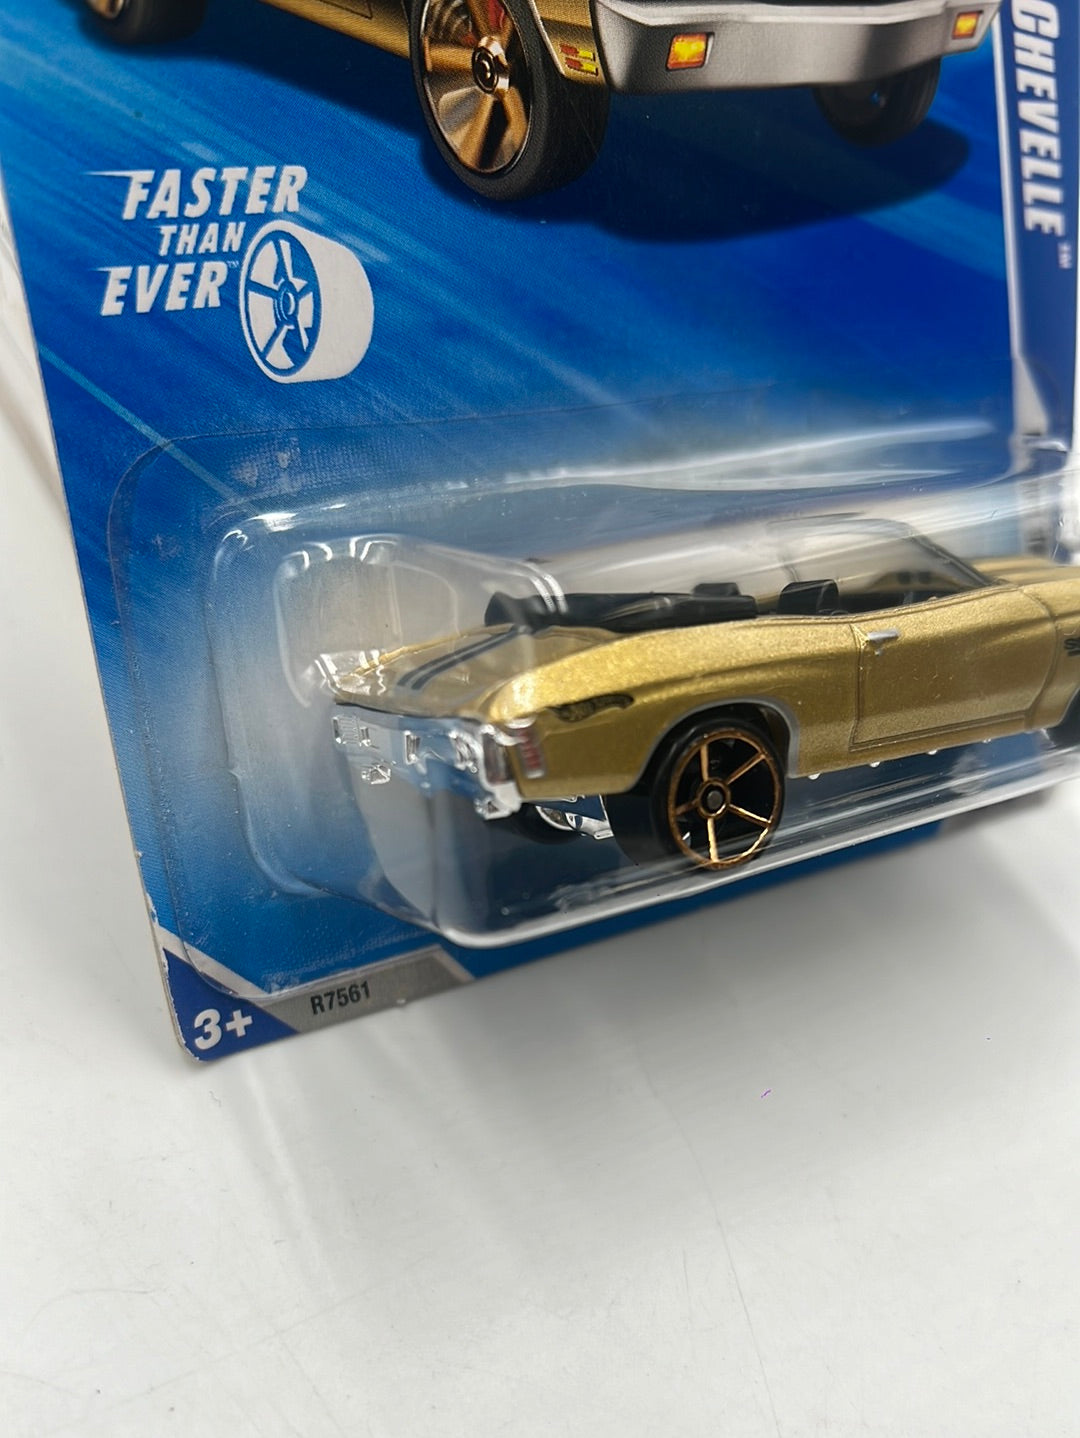 2010 Hot Wheels Faster Than Ever ‘70 Chevy Chevelle Gold 136/240 2C